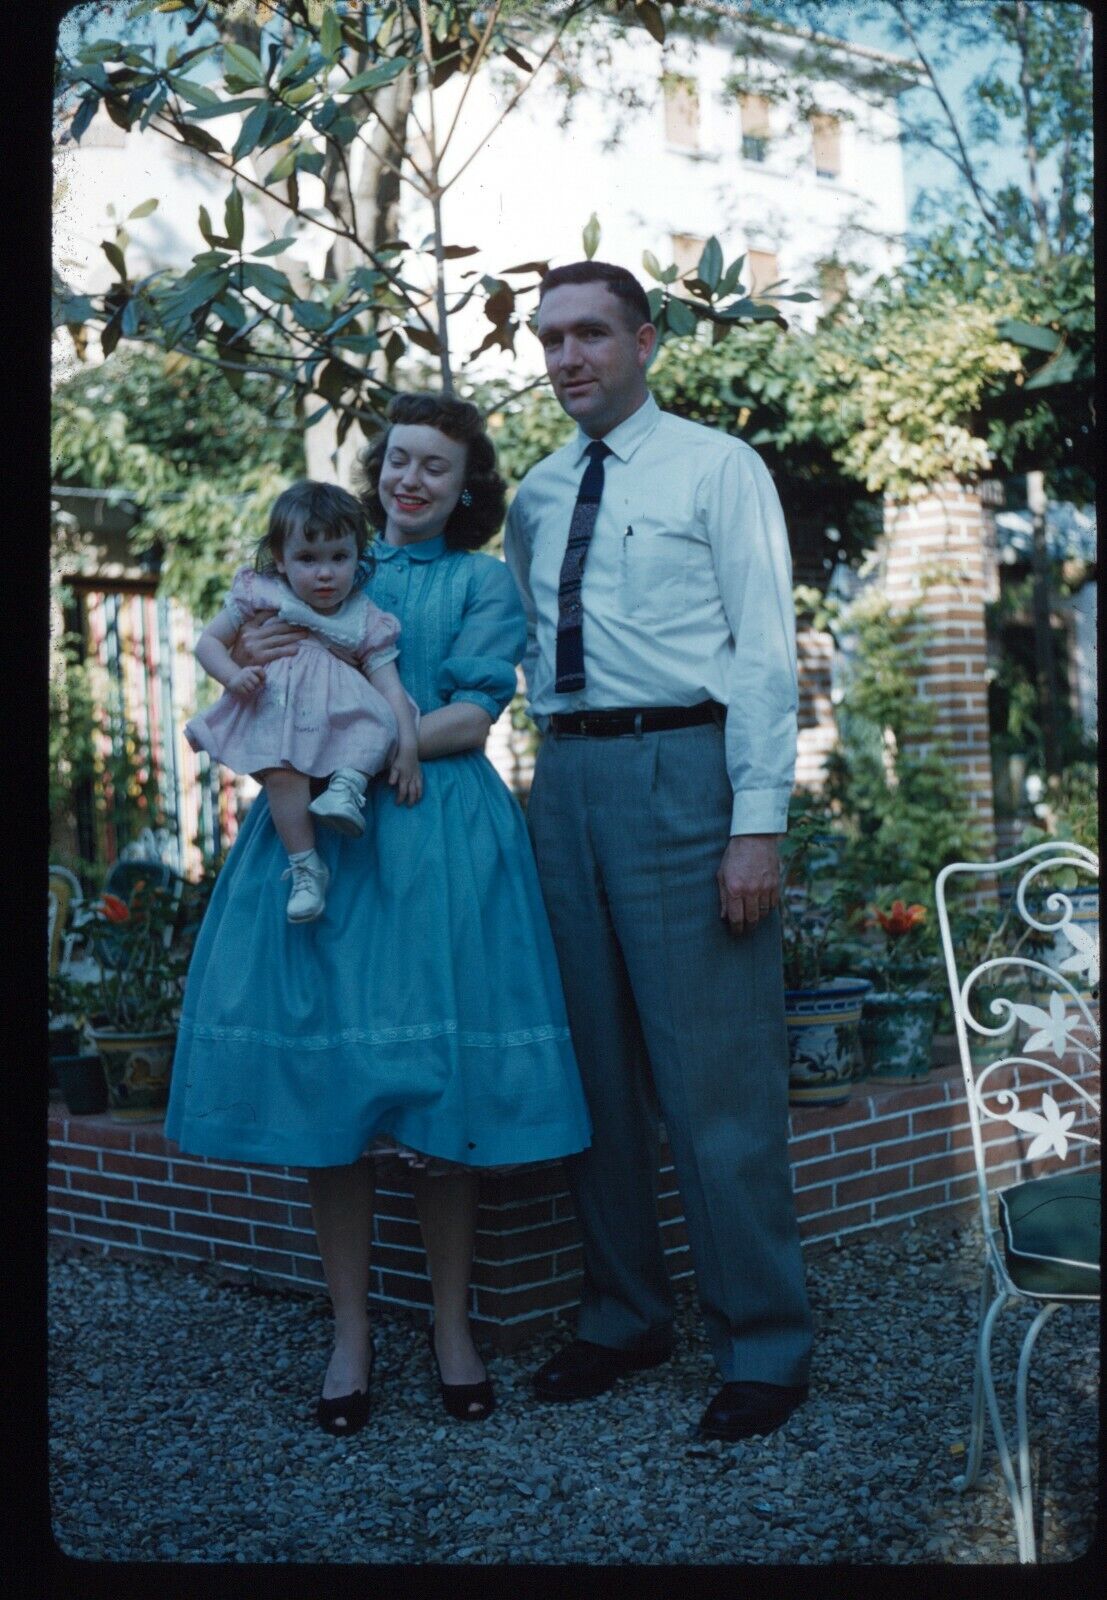 1960 Young Parents with Toddler in Garden 60s Vintage 35mm Kodachrome Slide